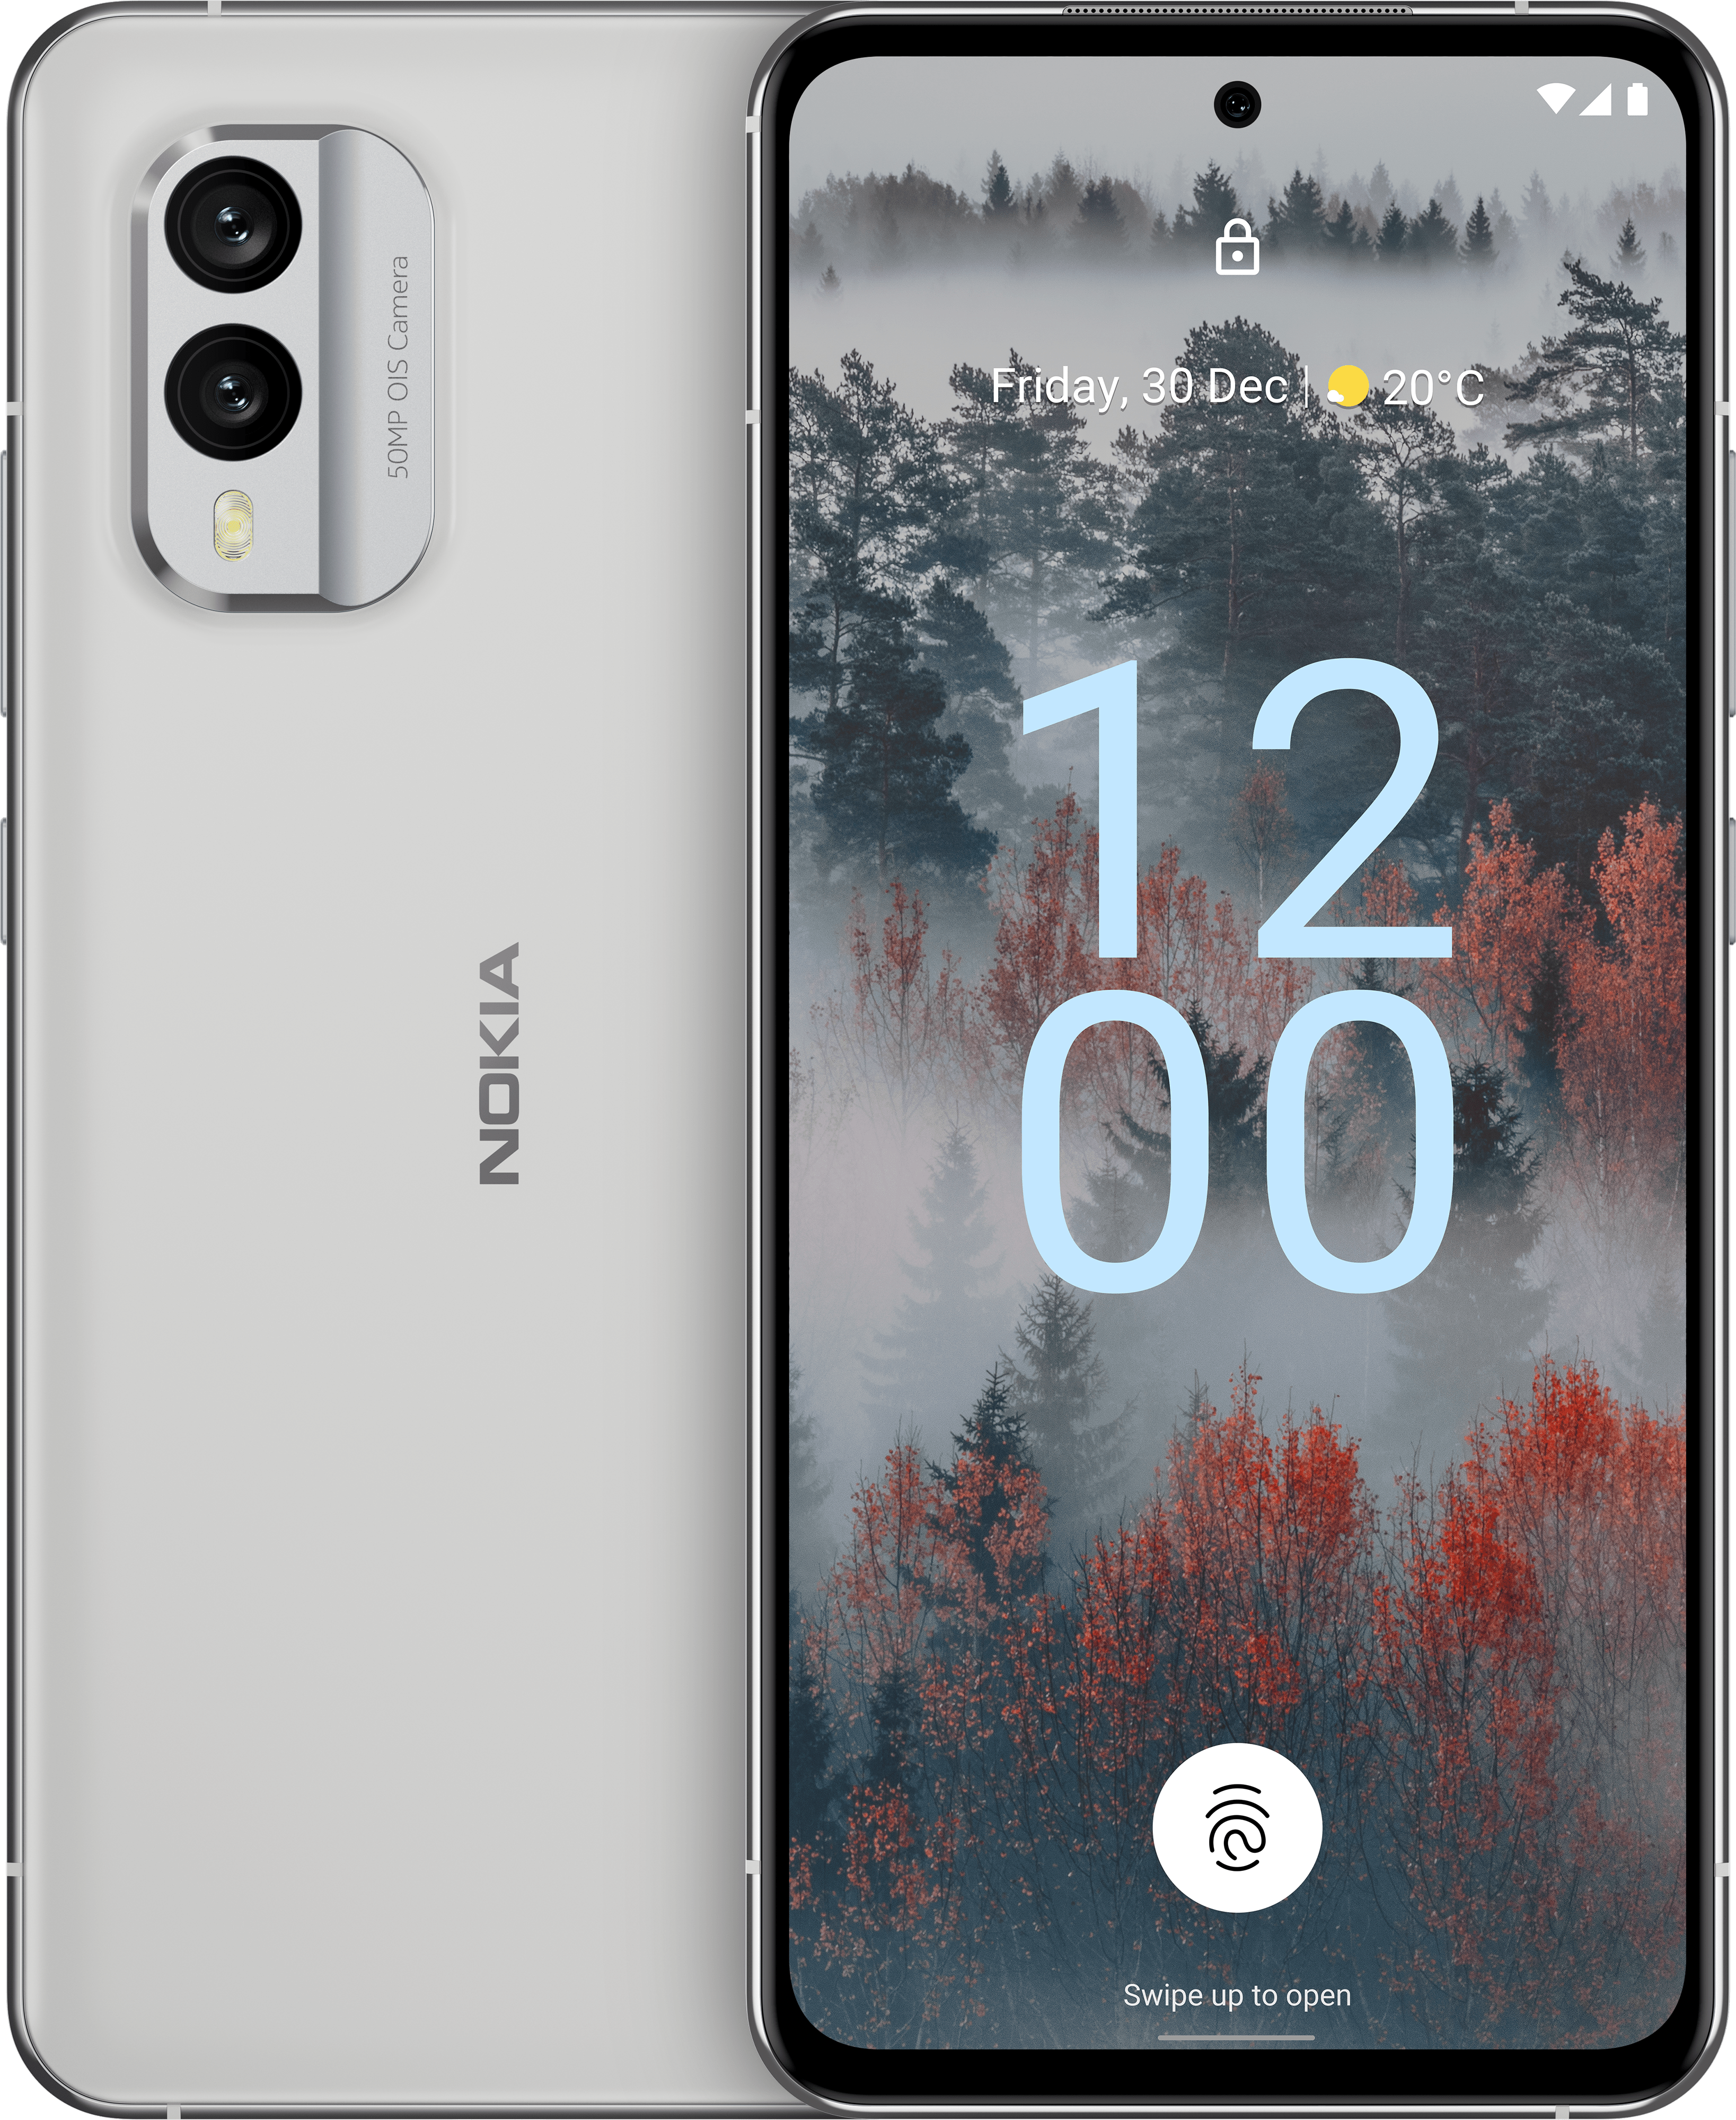 Nokia X30 5G sustainable smartphone with OIS camera